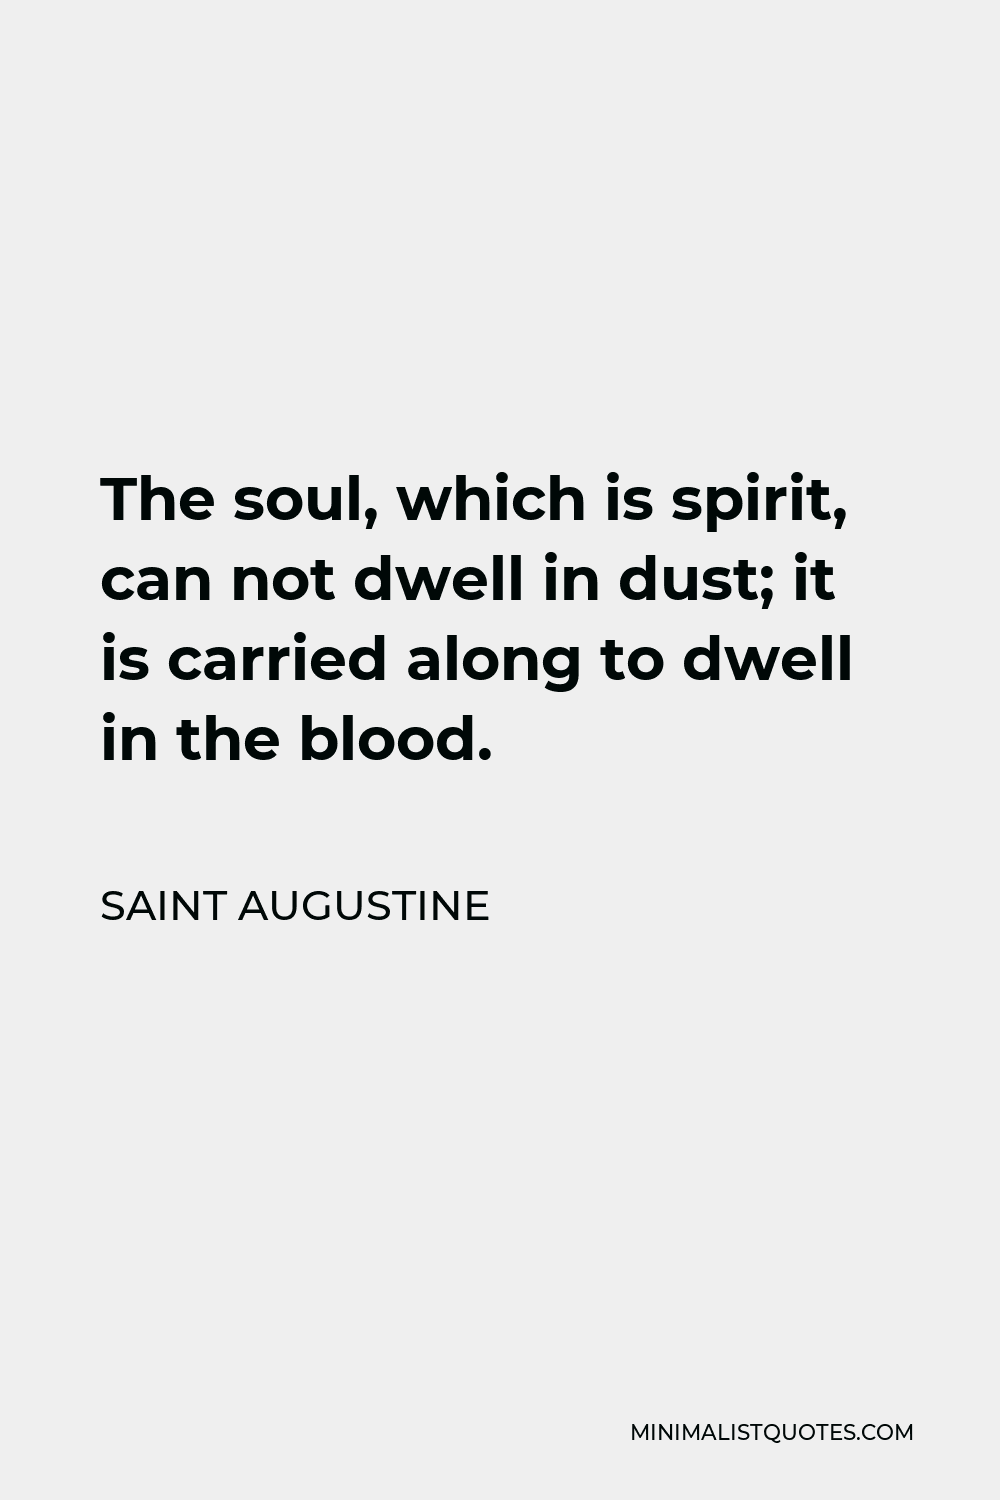 Saint Augustine Quote - The soul, which is spirit, can not dwell in dust; it is carried along to dwell in the blood.